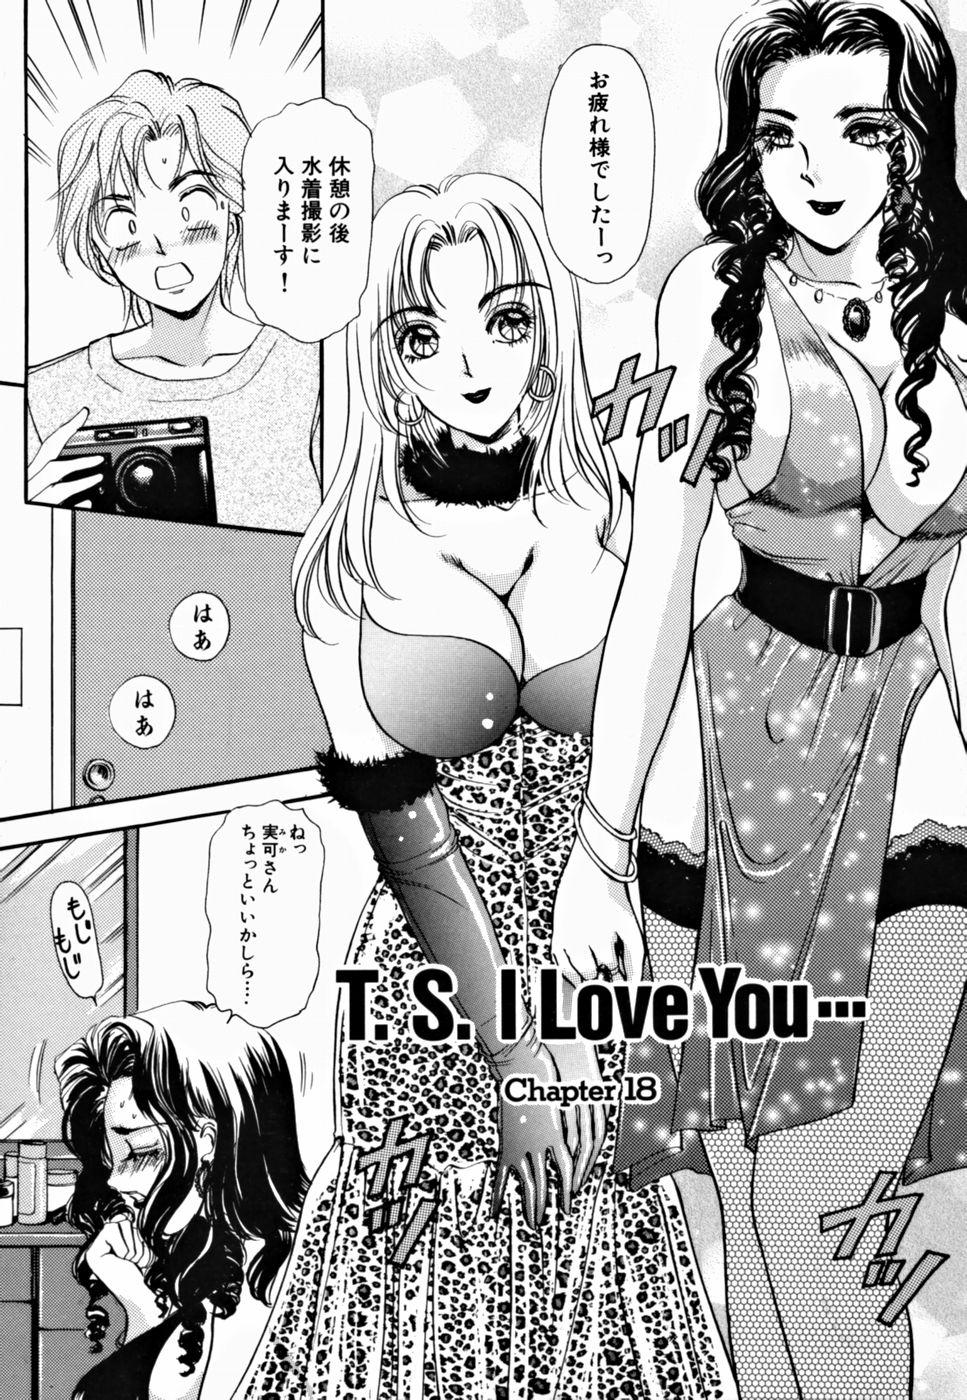 Mexicano T.S. I LOVE YOU... 2 - Lucky Girls Tsuiteru Onna Hooker - Page 13